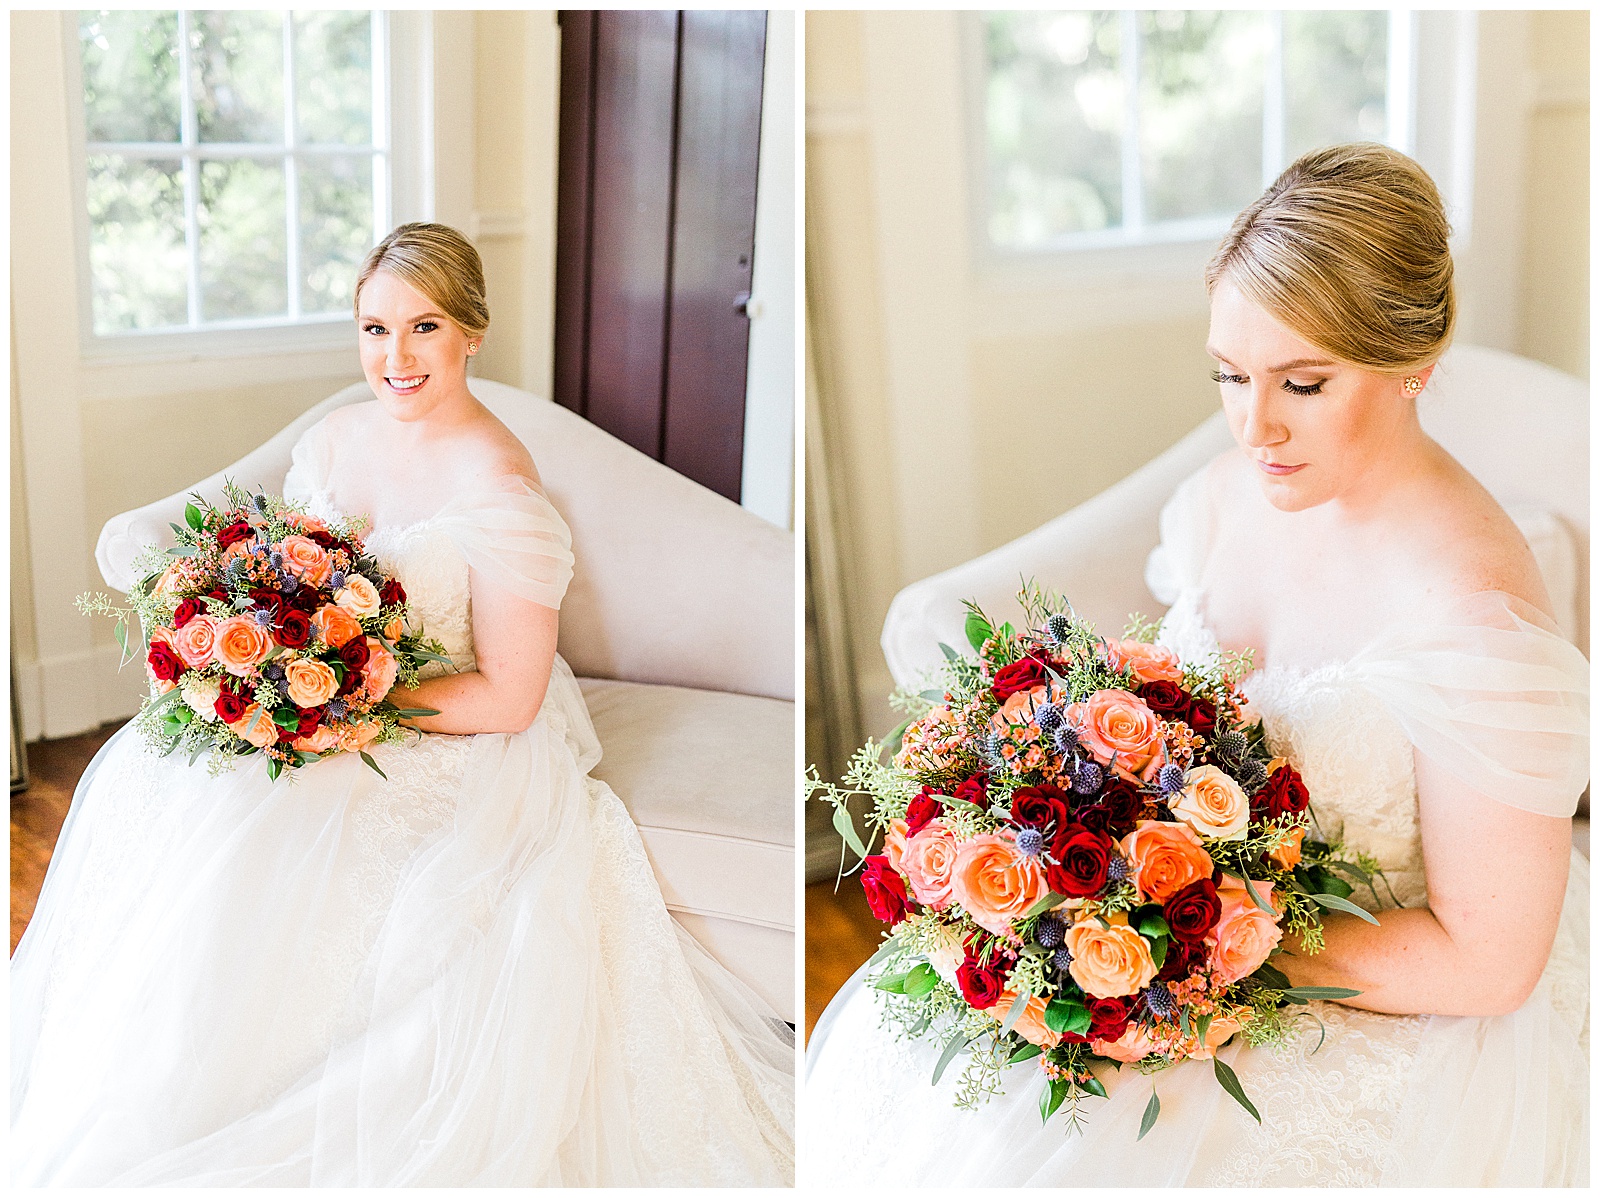 Dreamy Elegant Bridal Portraits in Charlotte, NC with Olivia | Kevyn Dixon Photography | Check out the rest of the shoot at http://kevyndixonphoto.com/blog/